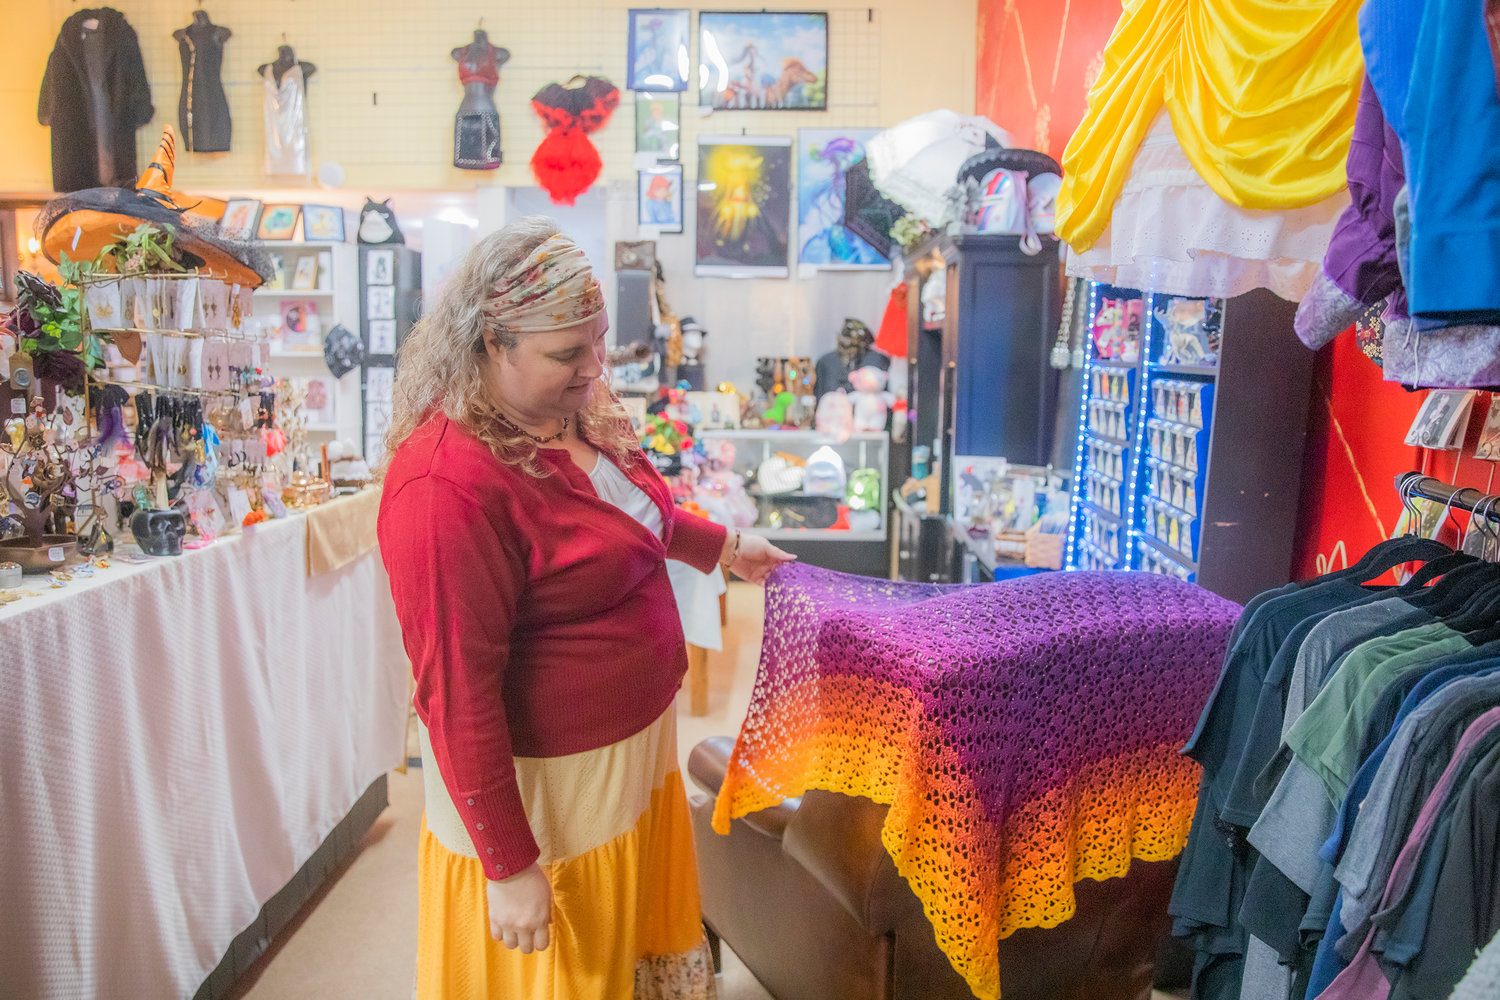 Christy Lakin displays handmade fabrics at The Victorian Showcase and Steampunk Emporium in downtown Centralia on Friday.